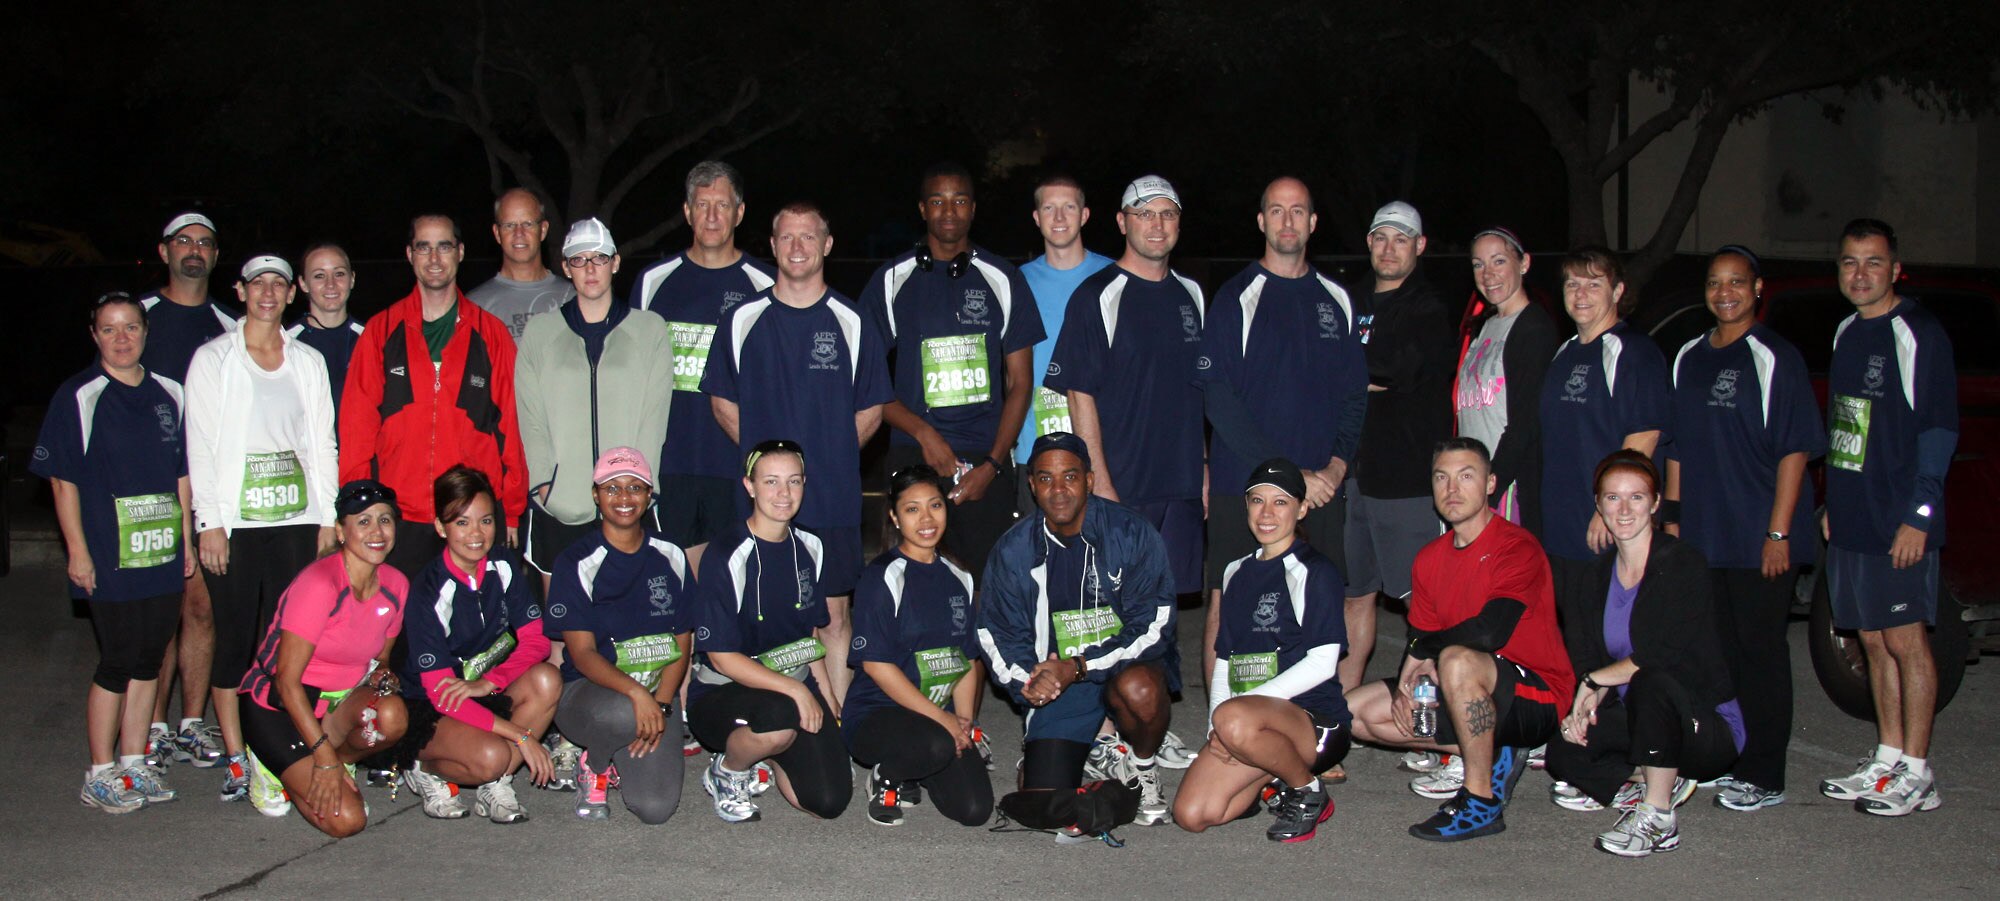 RANDOLPH AIR FORCE BASE, Texas - About 27 members of the Air Force Personnel Center met Nov. 13 at Randolph Air Force Base, Texas to convoy over to the 2011 Rock n’ Roll Half Marathon and Marathon in San Antonio.The personnel center had 19 people participate in the 26.2-mile marathon, and more than 80 ran in the 13.1-mile half marathon race. (U.S. Air Force photo/Tech. Sgt. Steve Grever)